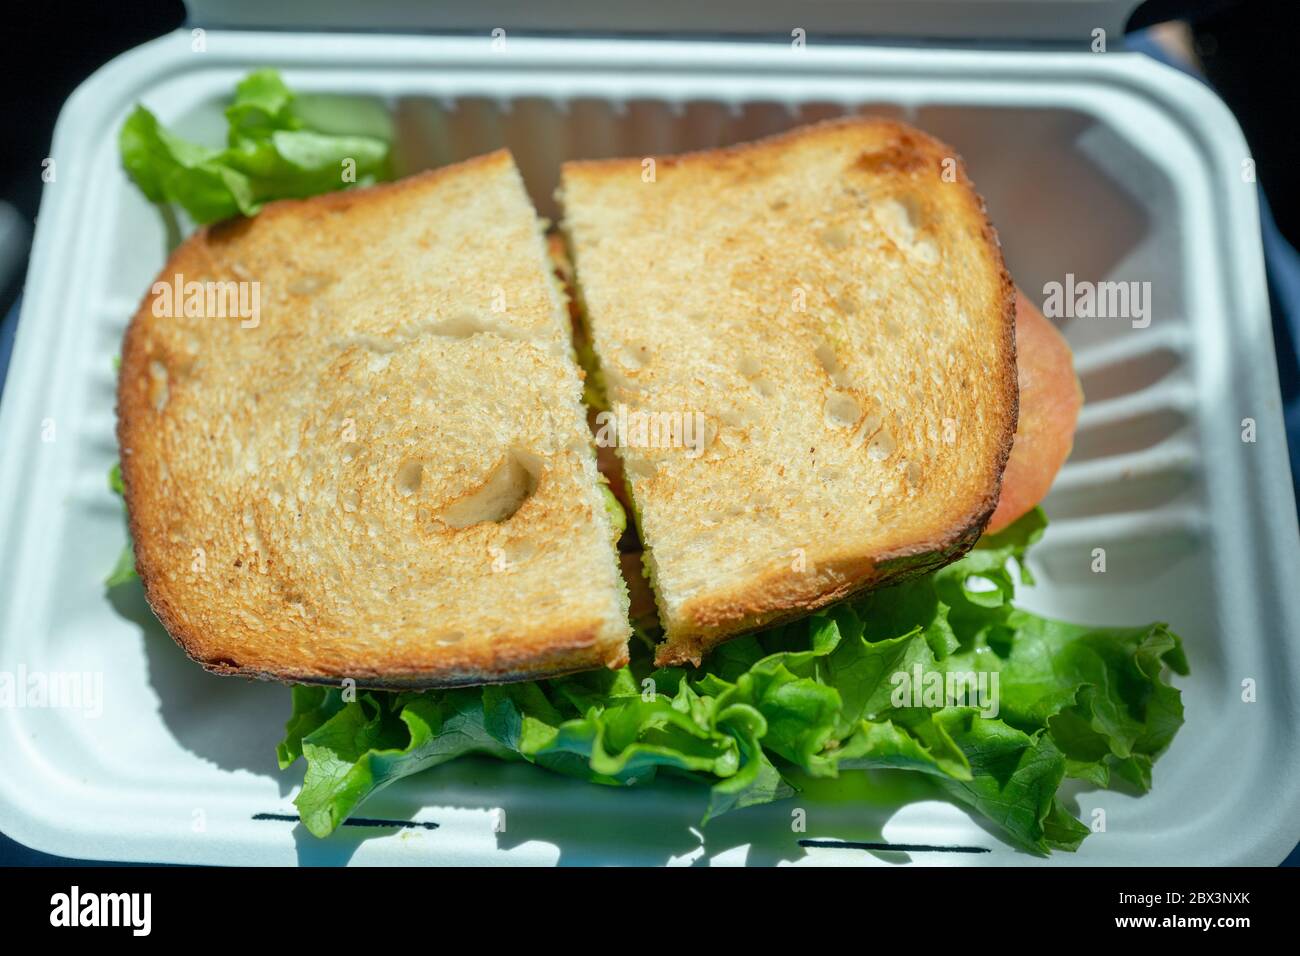 Sandwich on to go container from Boudin Bakery in Walnut Creek, California, an example of a restaurant providing takeout food during lockdowns related to an outbreak of the COVID-19 coronavirus, April 16, 2020. () Stock Photo